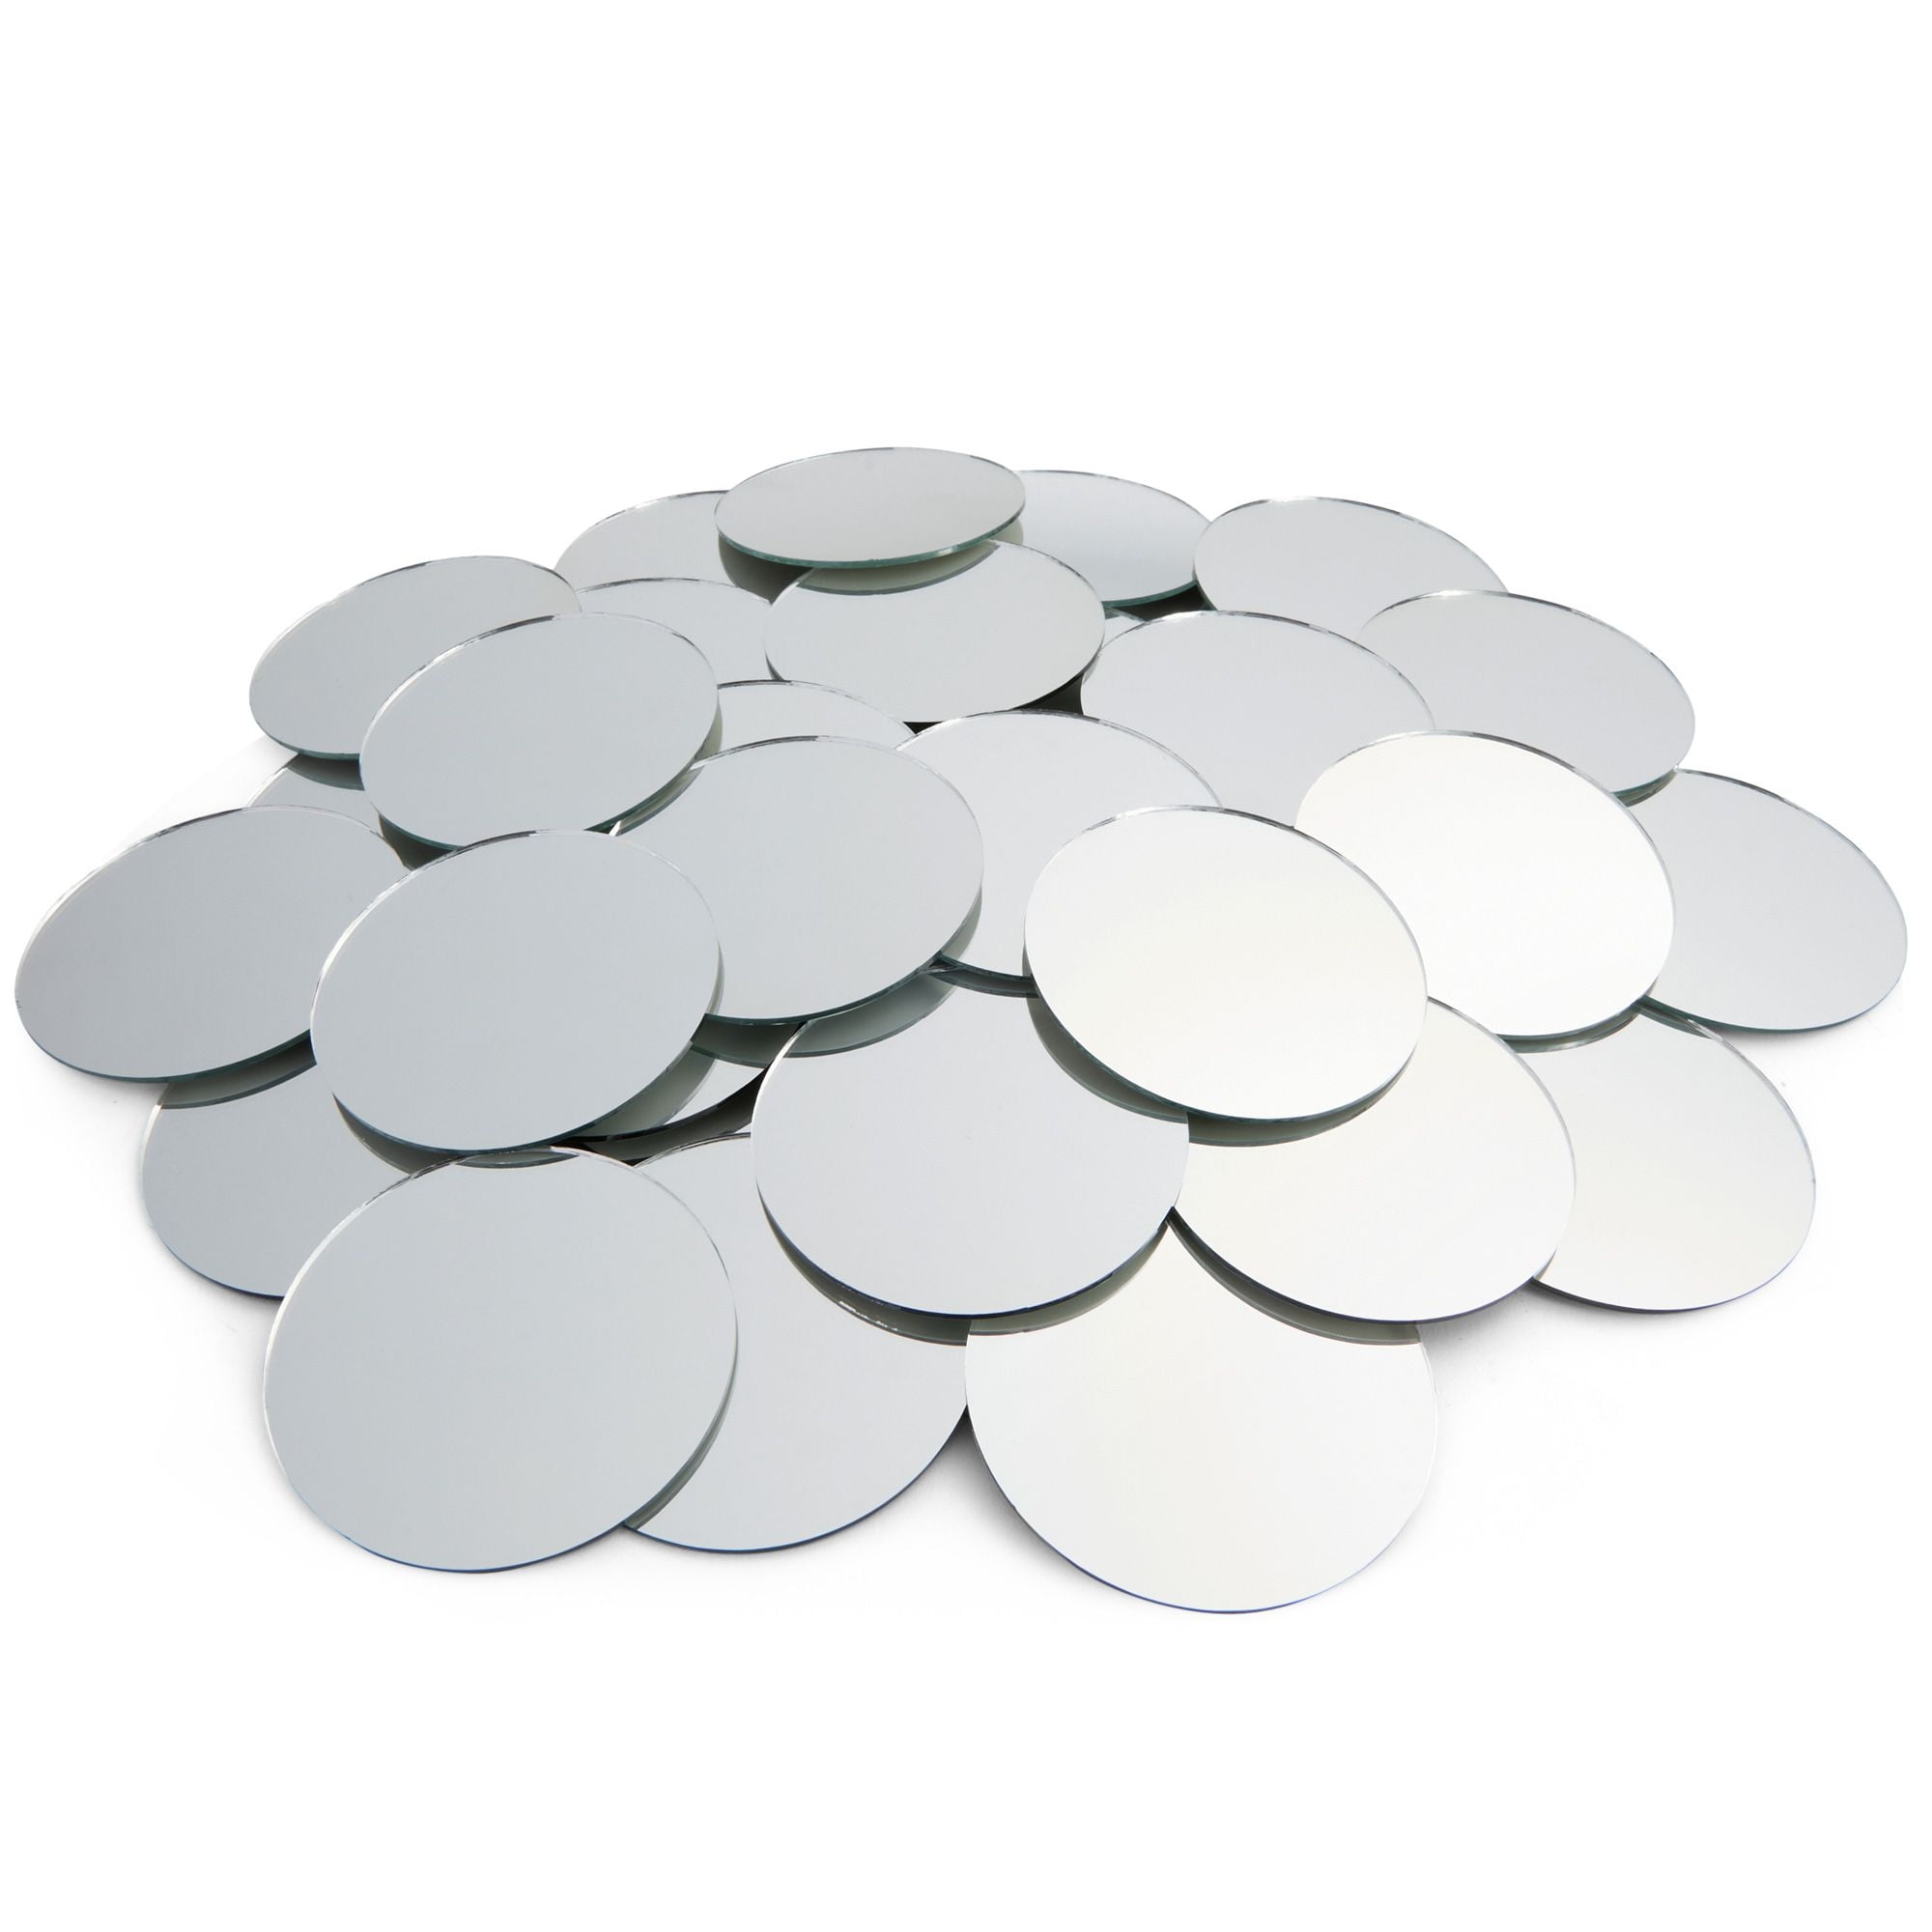 Wholesale SUPERFINDINGS 30PCS Small Circle Mirror Tiles White Mini Round  Glass Mirror for Arts Crafts Projects Traveling Framing Decoration 